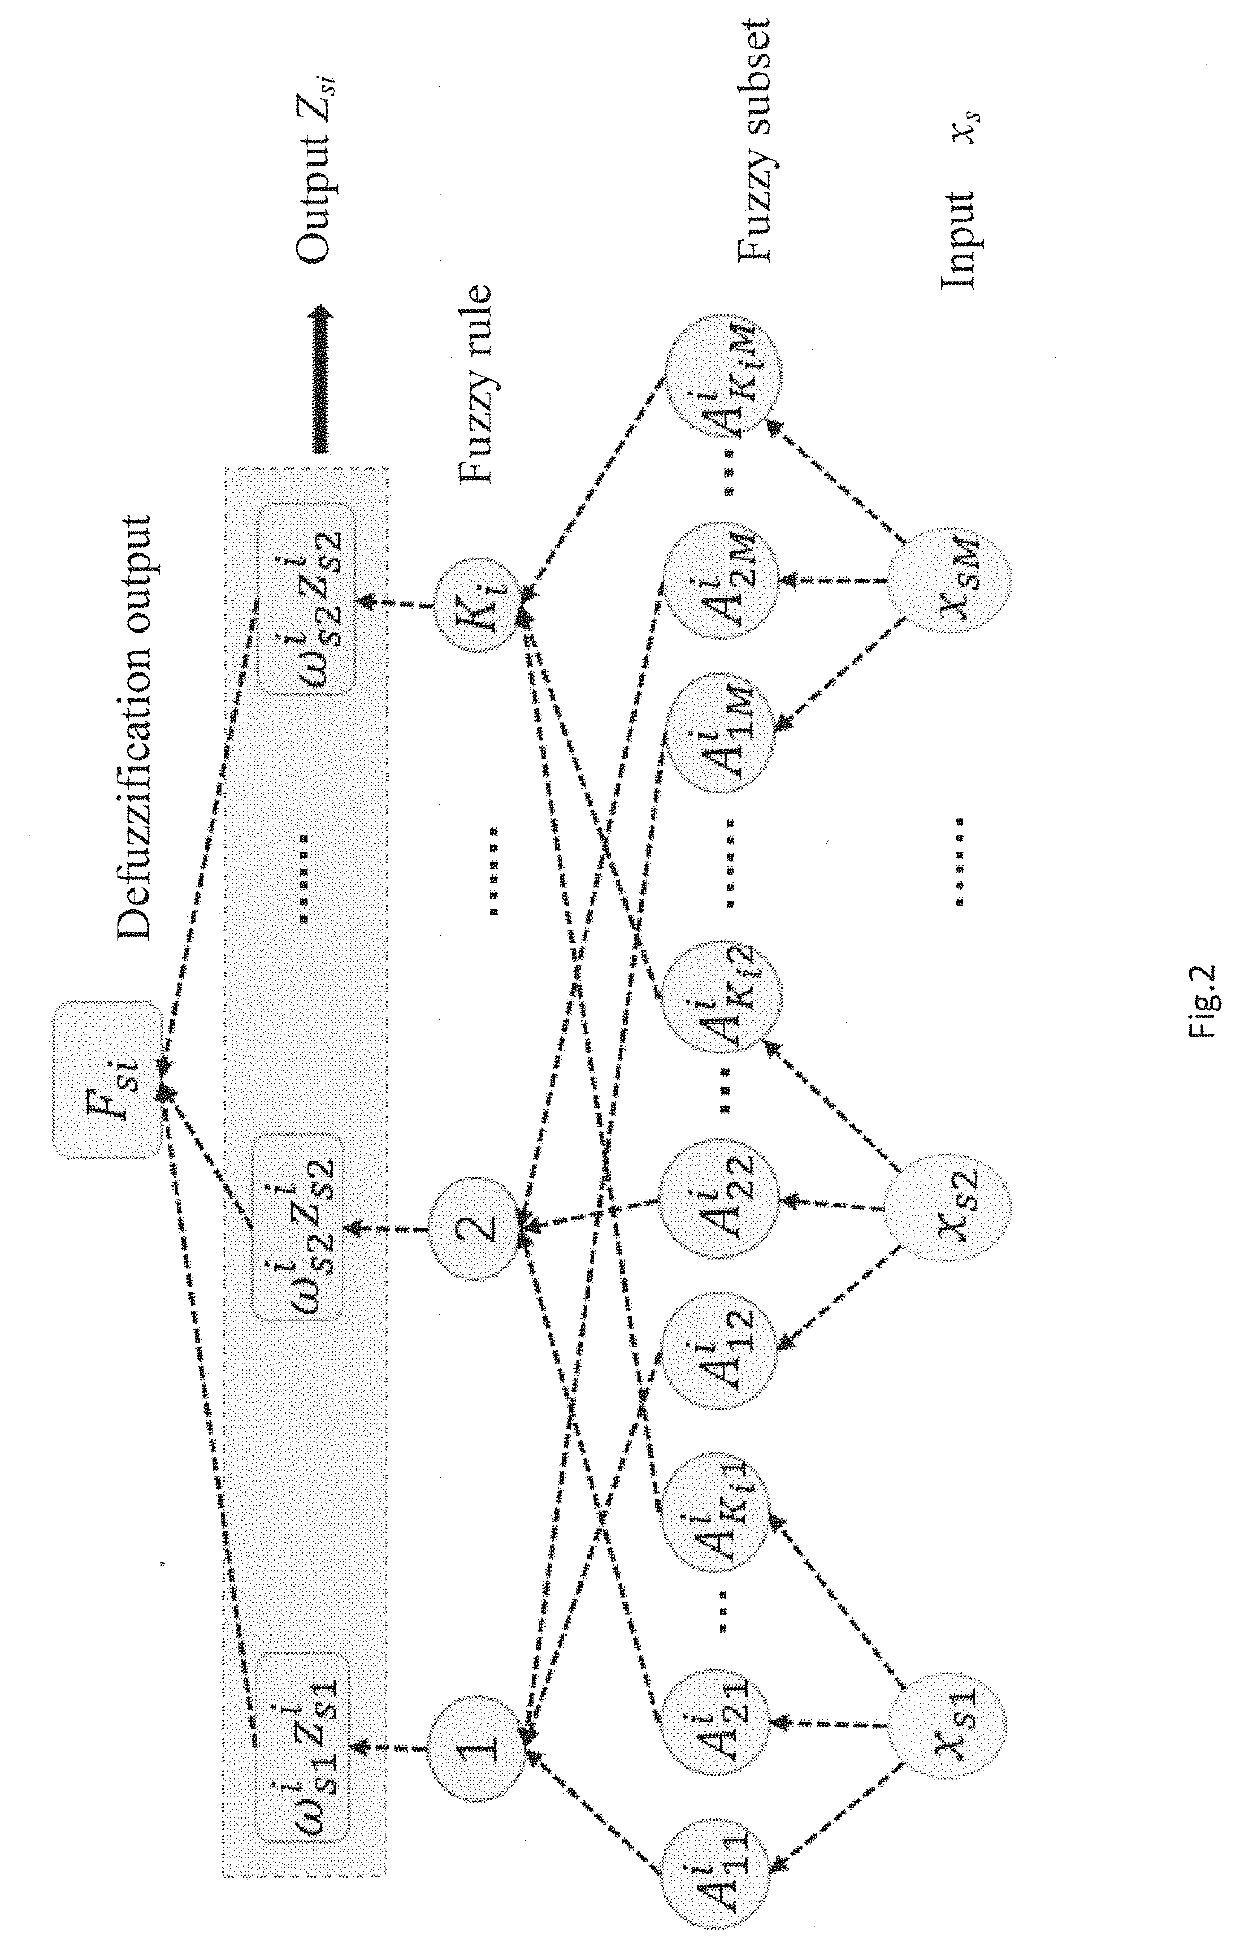 Fault monitoring method for sewage treatment process based on fuzzy width adaptive learning model